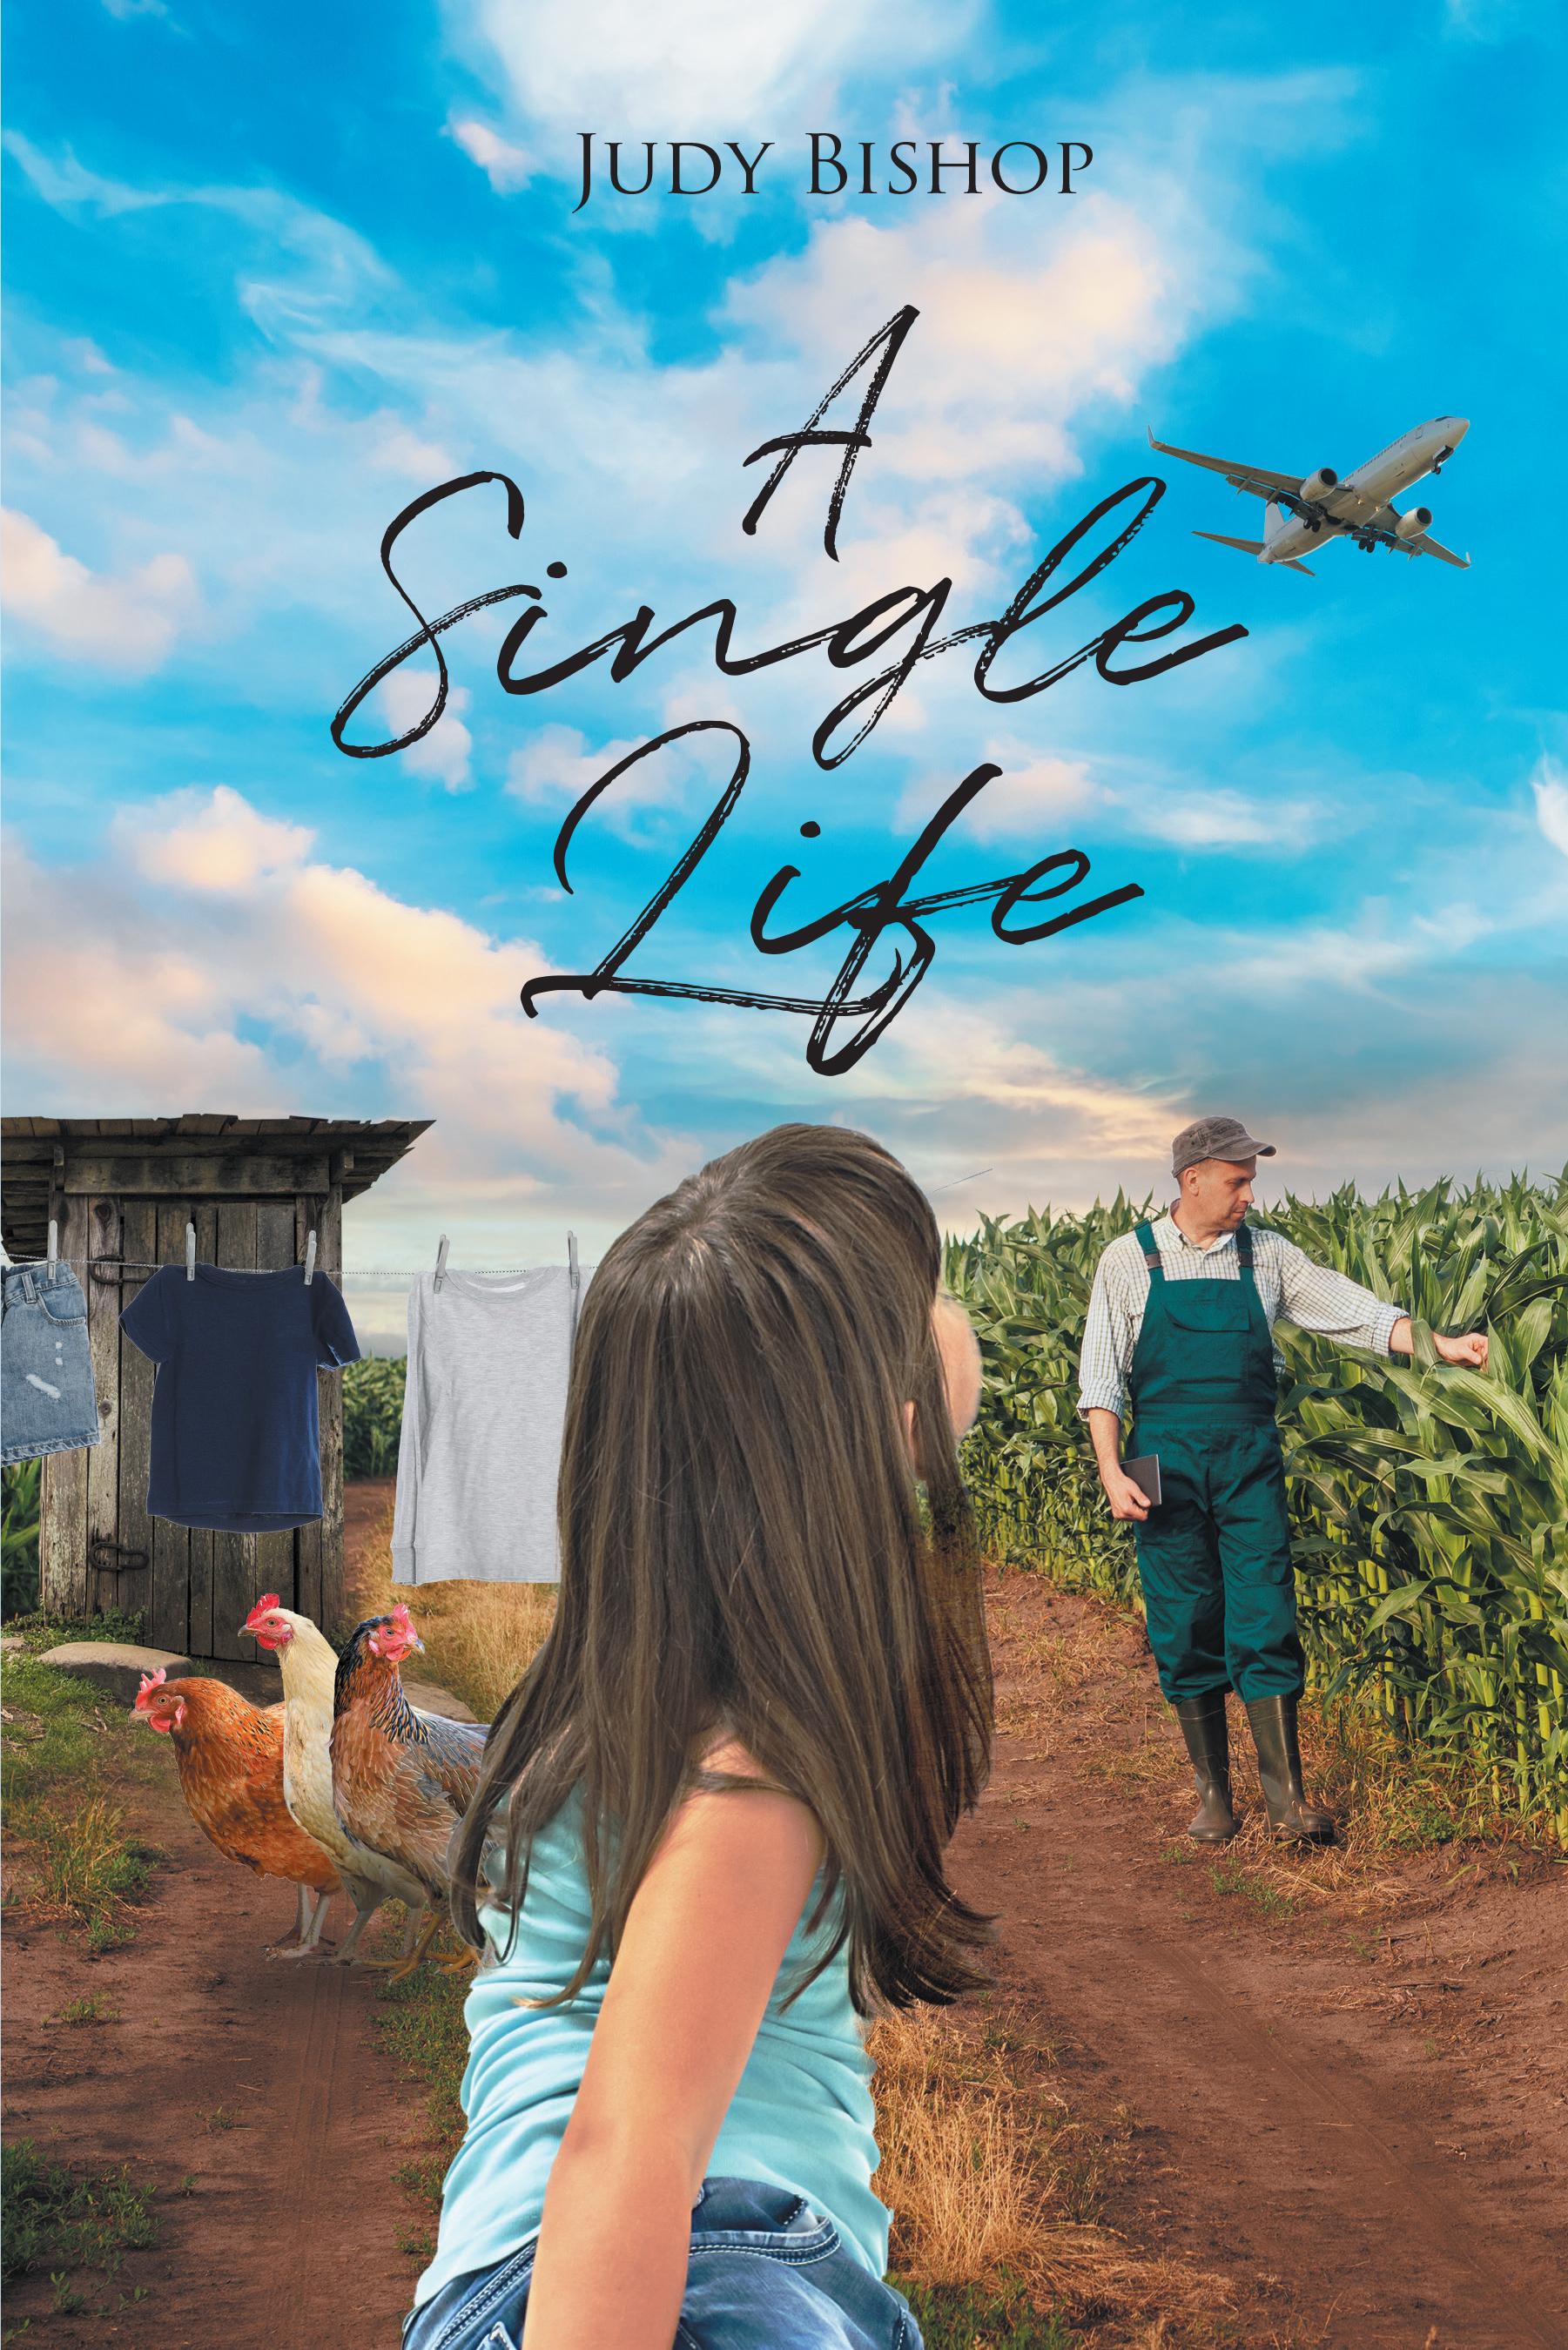 Author Judy Bishop’s New Book, "A Single Life," is a Stirring, Autobiographical Account That Reflects Upon the Author’s Life Choices, Struggles, and Triumphs